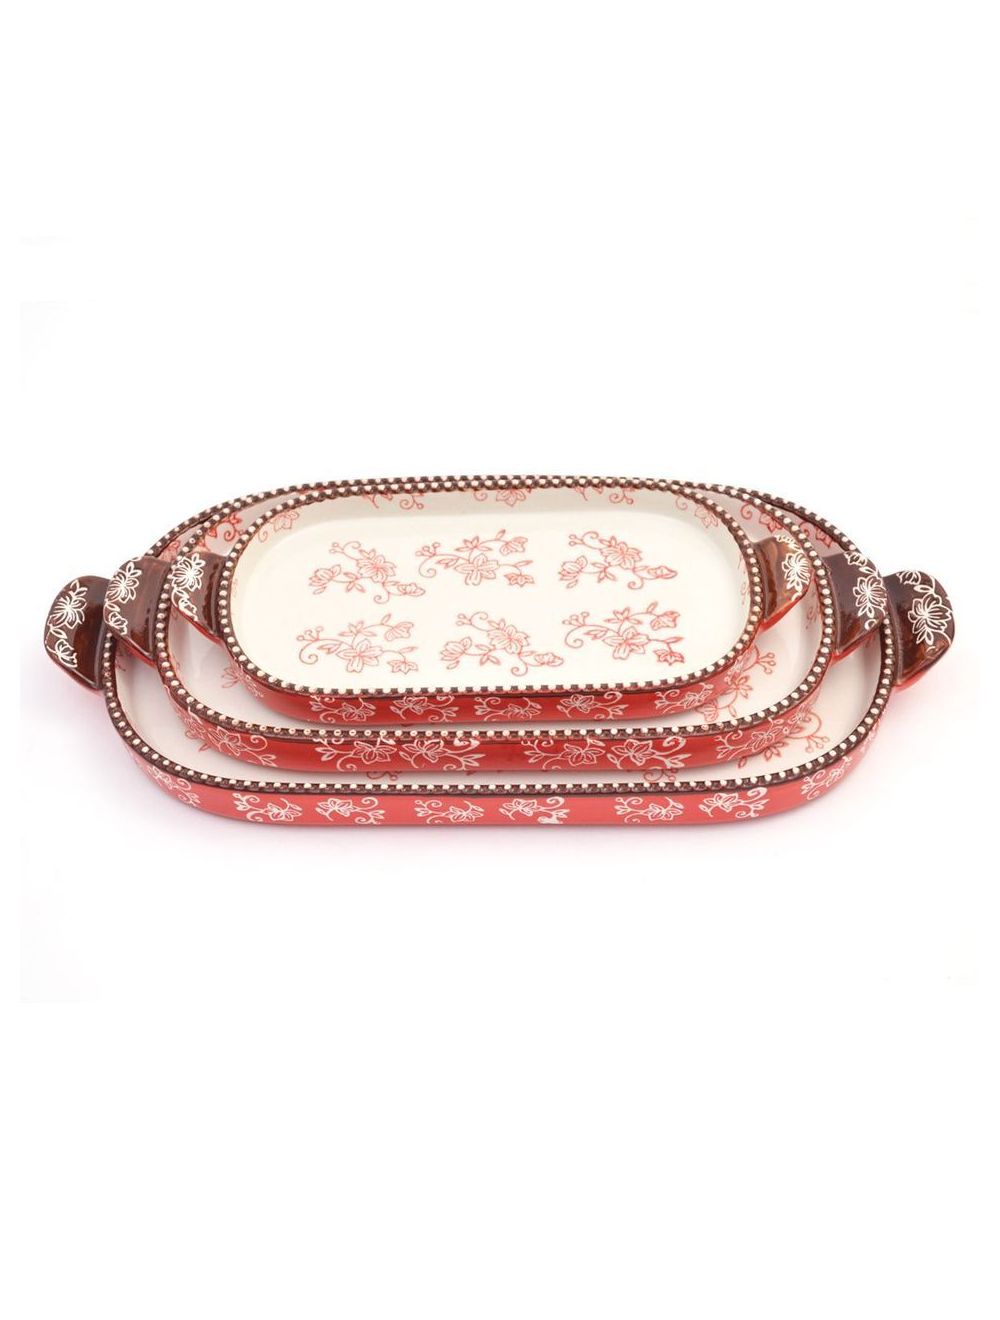 Temp-tations Floral Lace Squoval Tray Set - 3 Piece-T48987-red